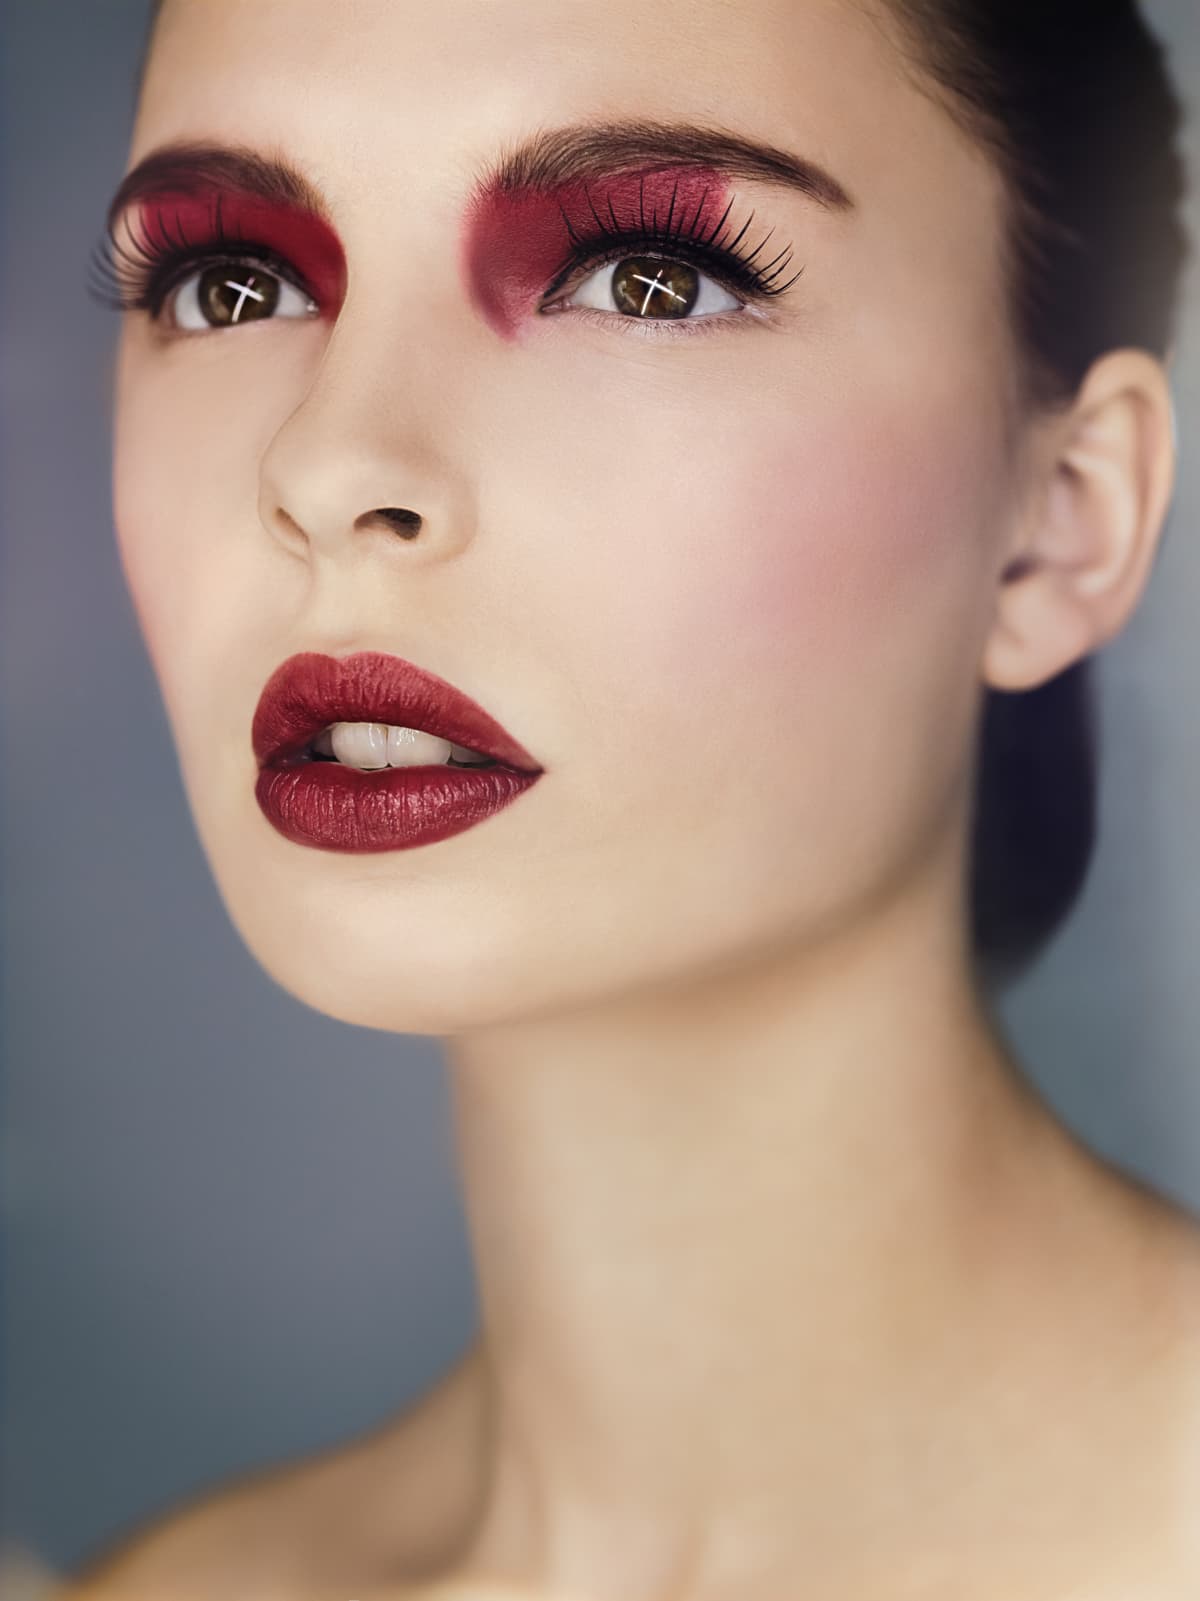 Beautiful woman with red eyeshadow and lipstick